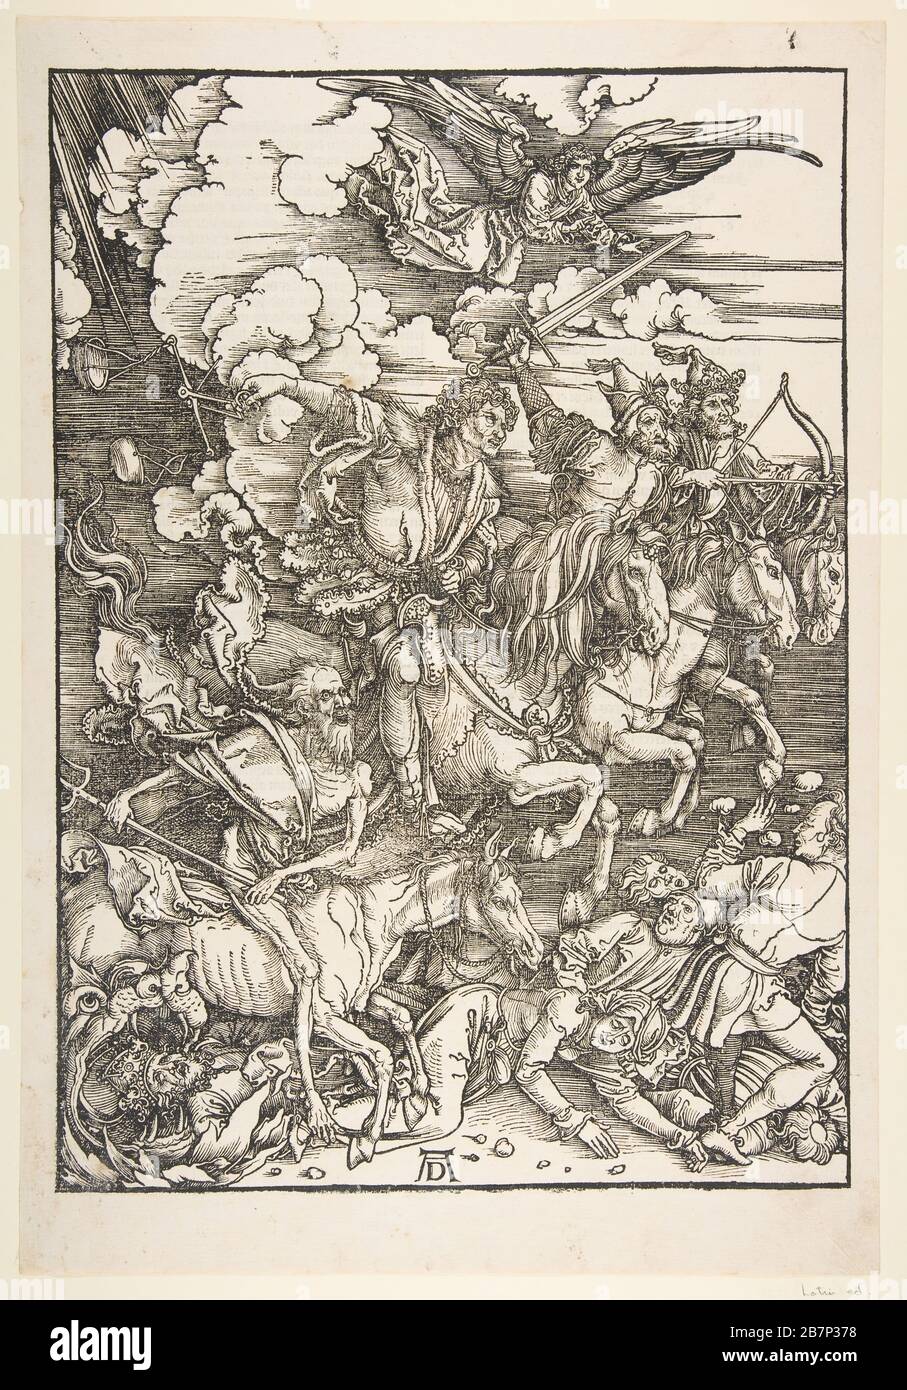 The Four Horsemen, from The Apocalypse, Latin Edition, 1511, ca. 1511. Stock Photo